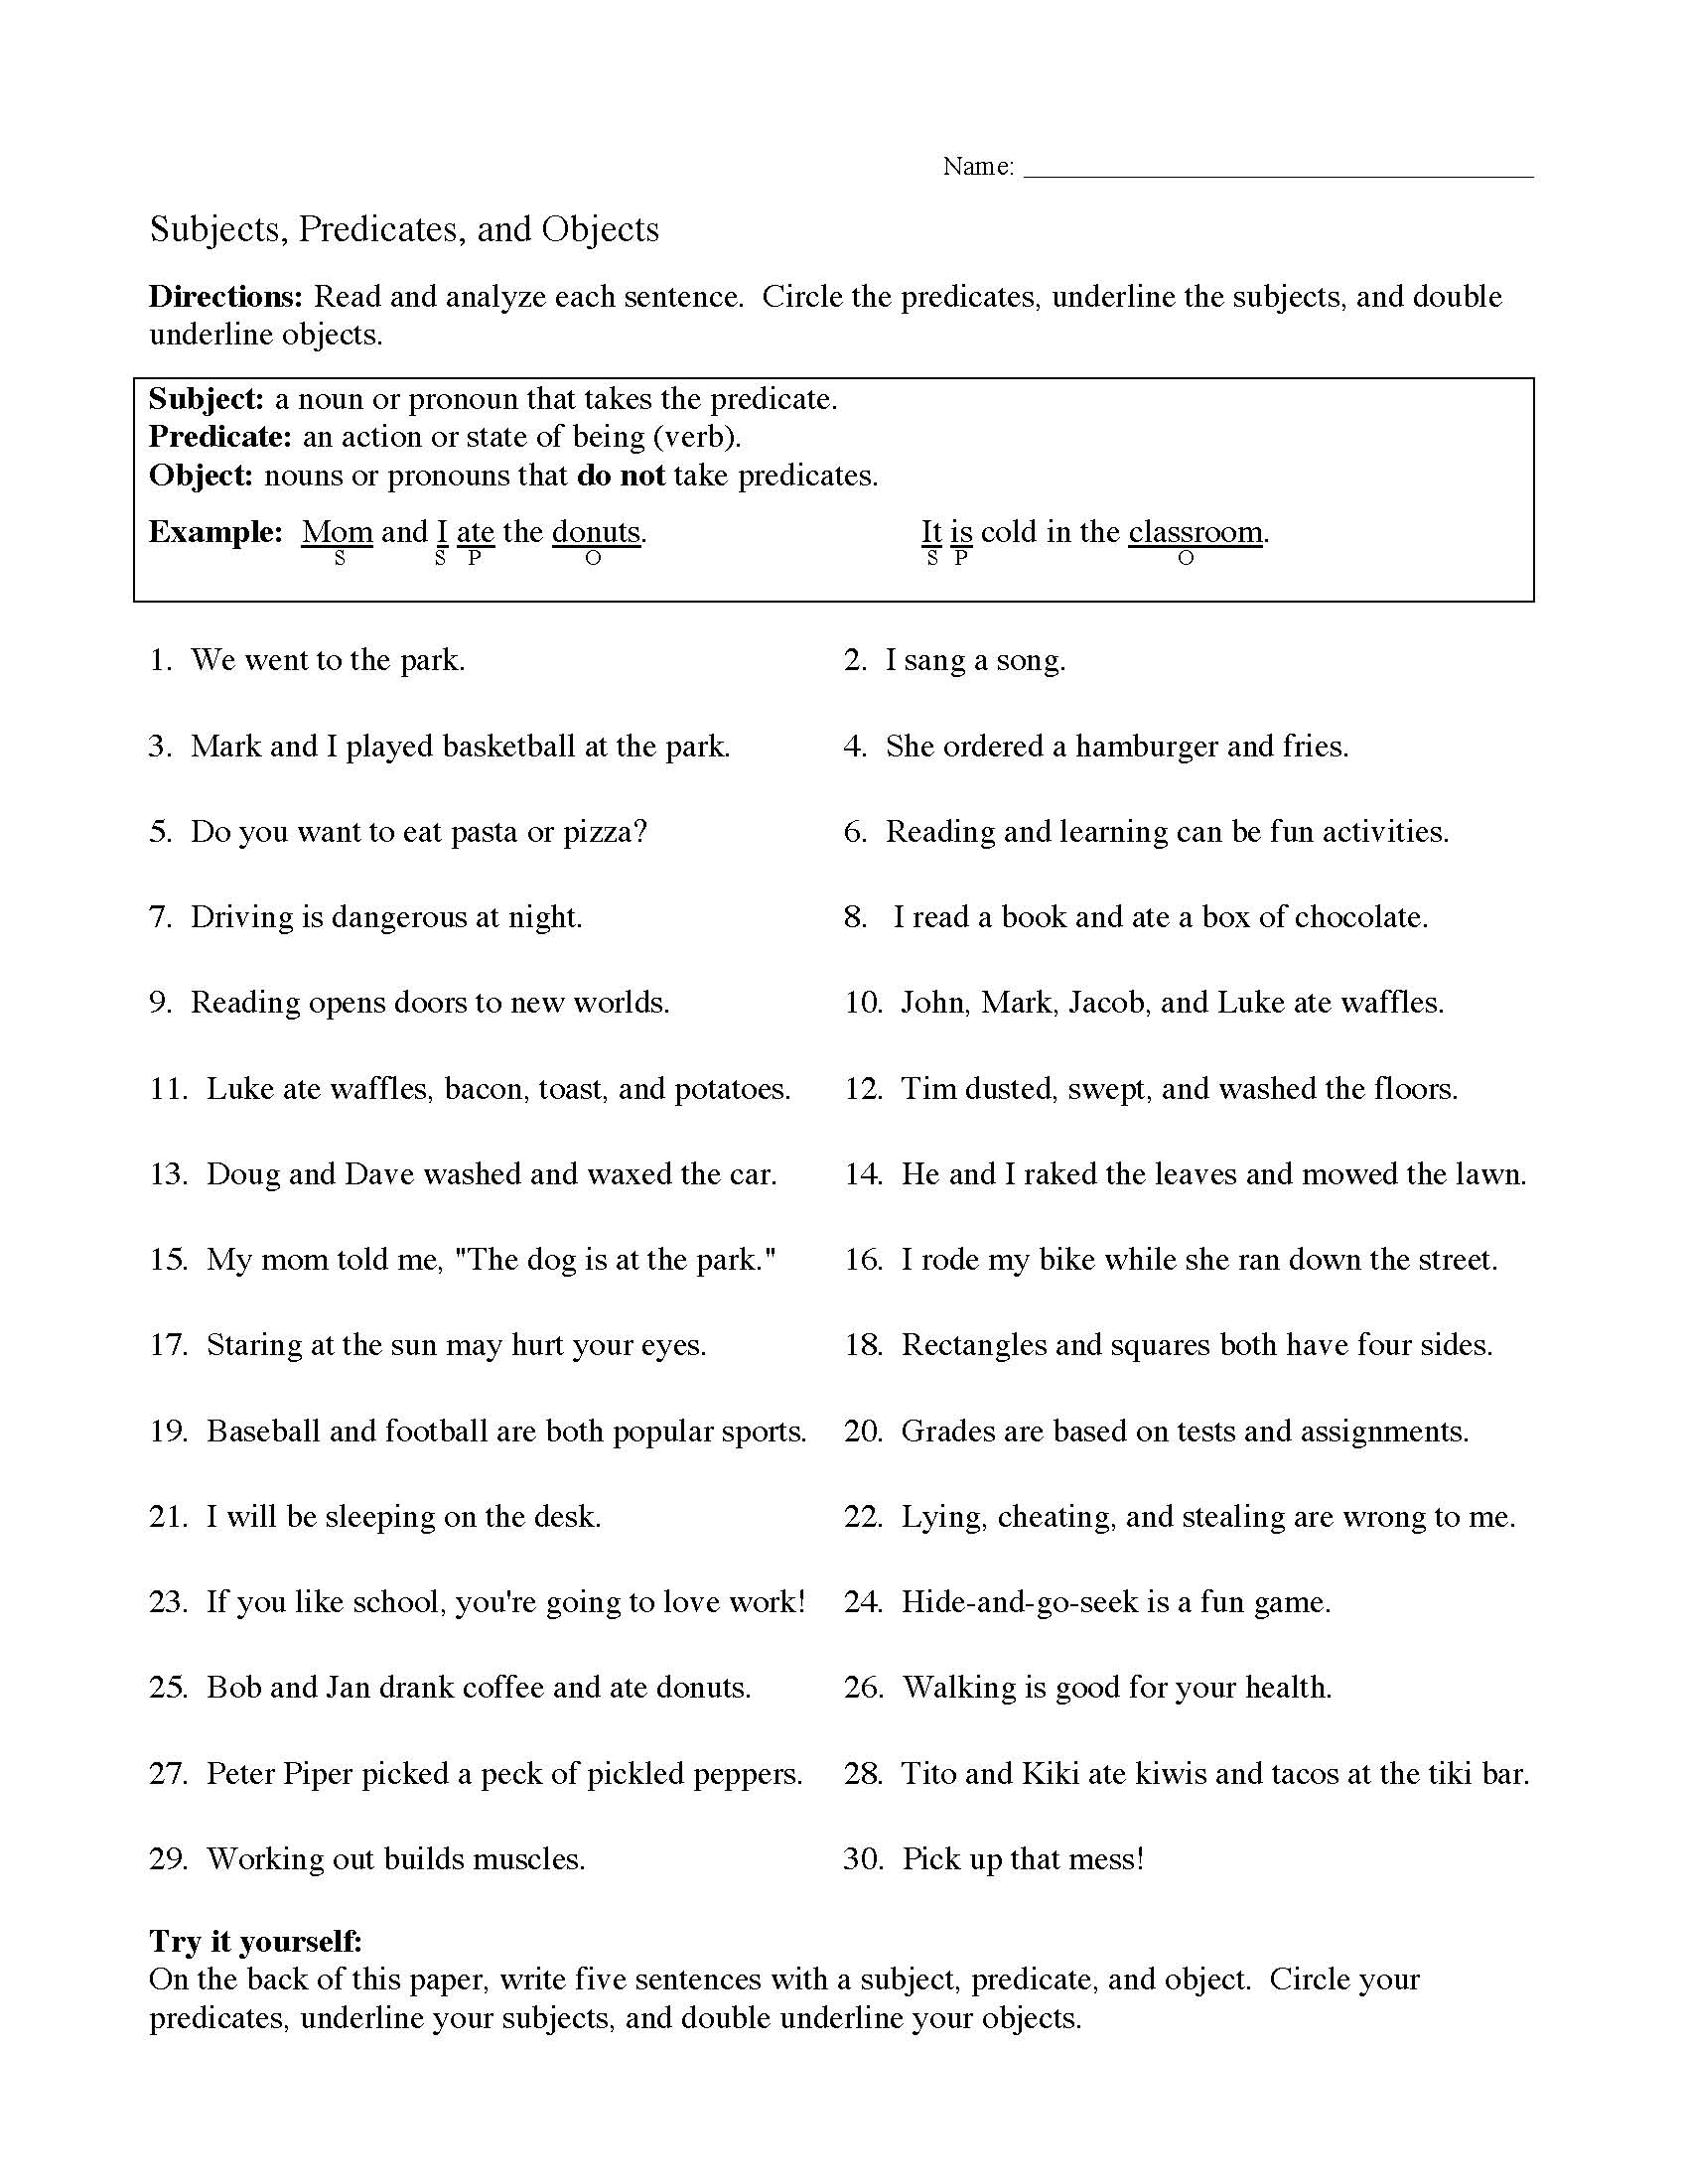 This is a preview image of Subjects, Predicates, and Objects Worksheet. Click on it to enlarge it or view the source file.